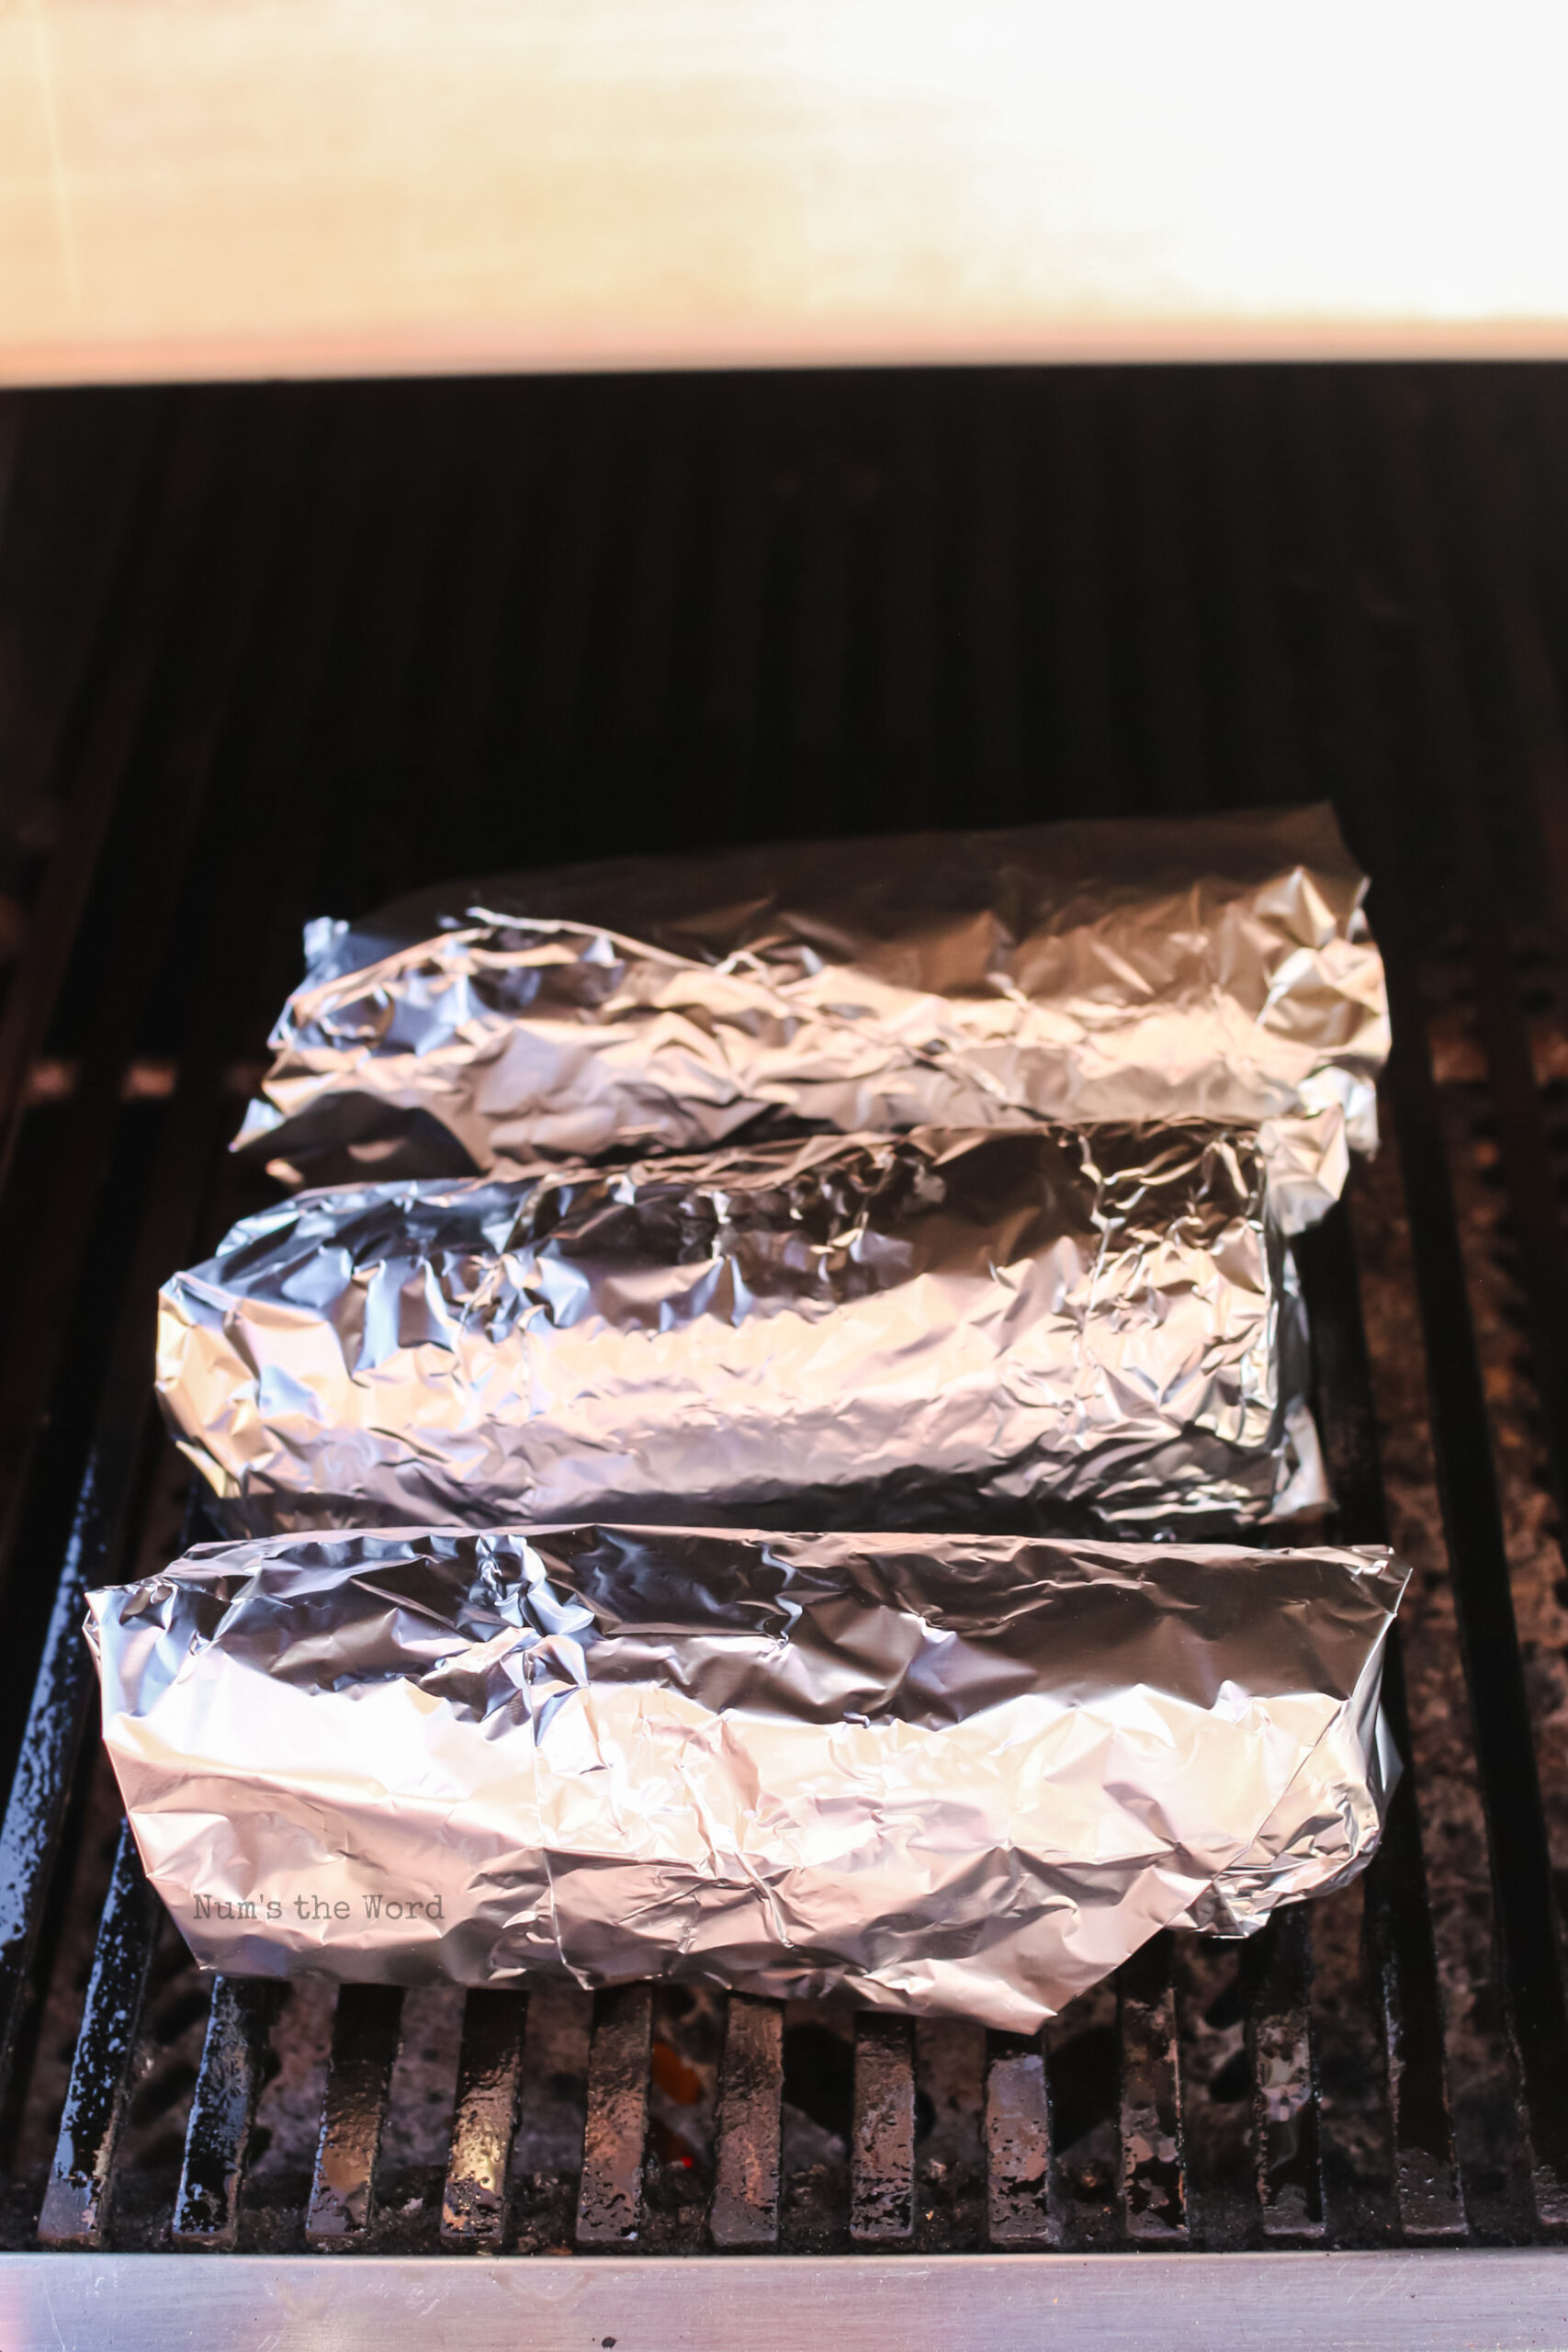 3 corn cobs wrapped in foil on grill